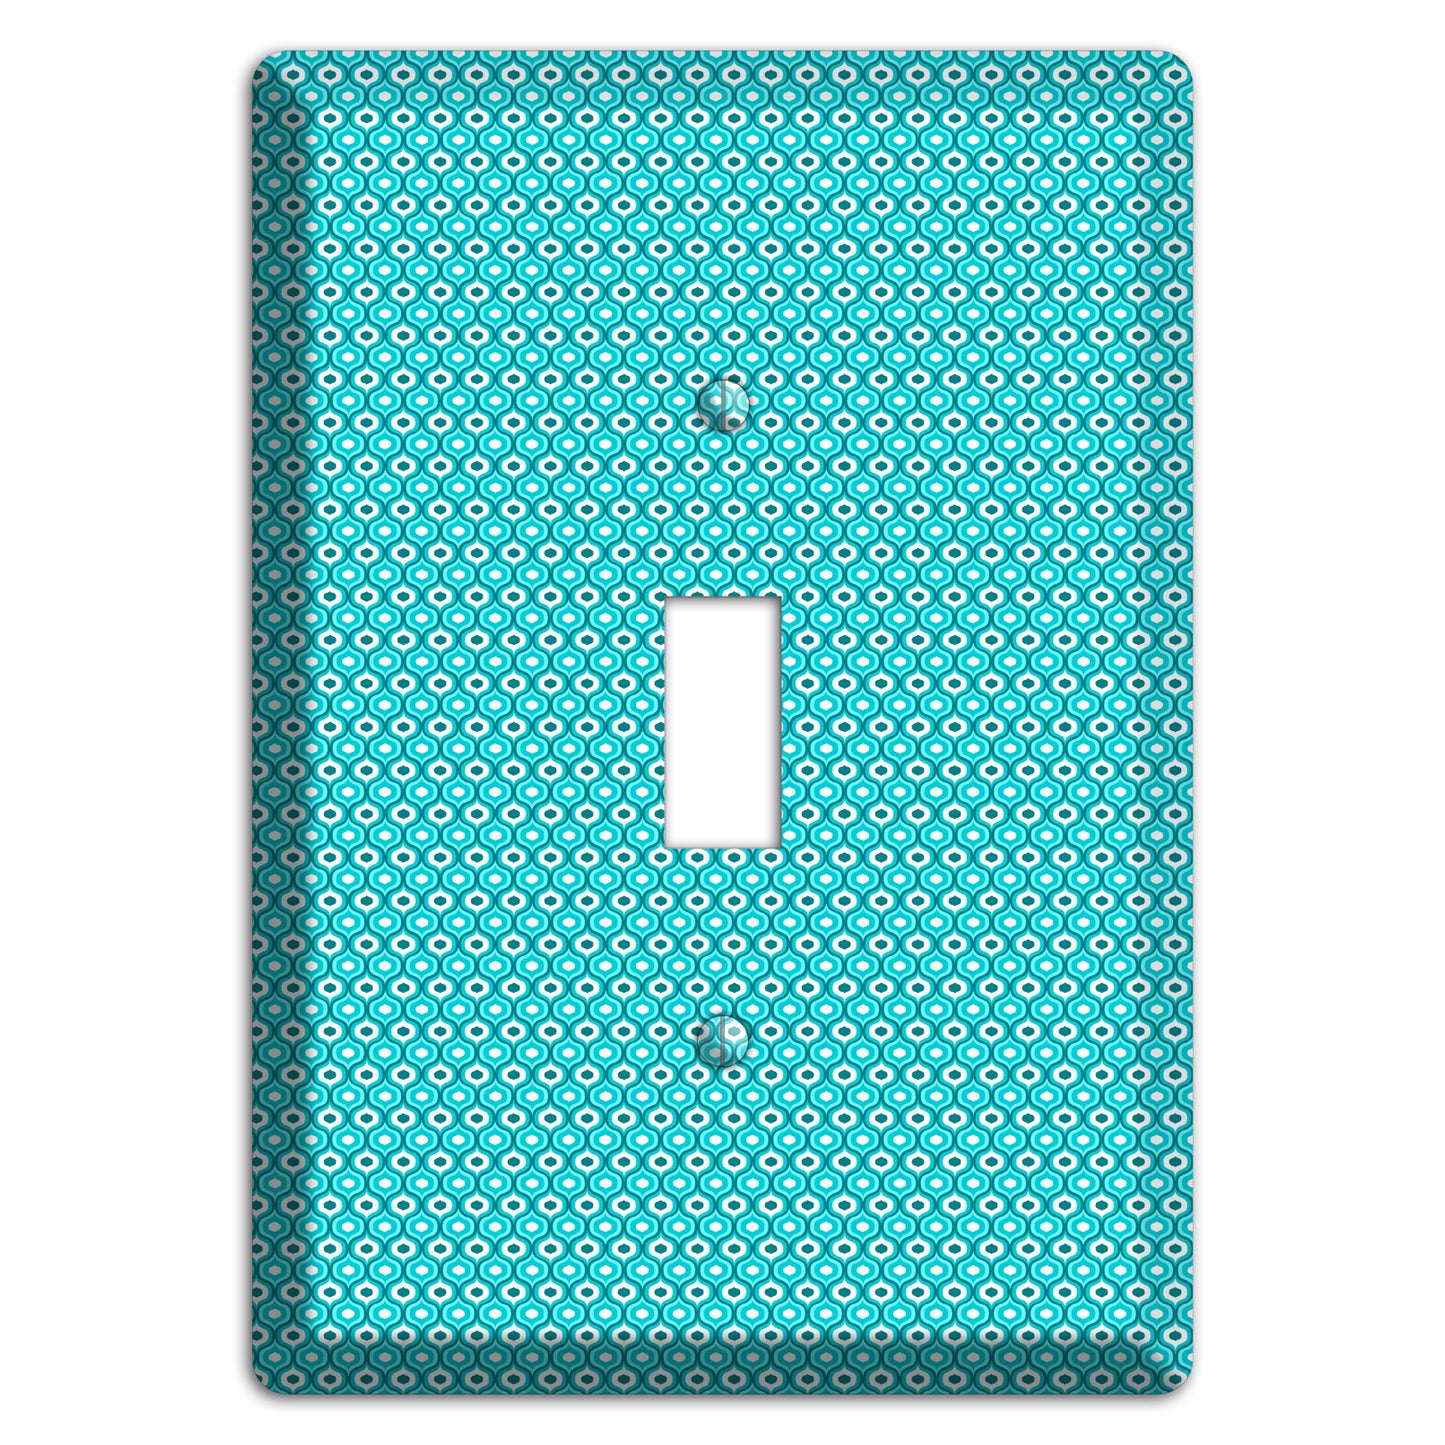 Turquoise Tiny Double Scallop Cover Plates